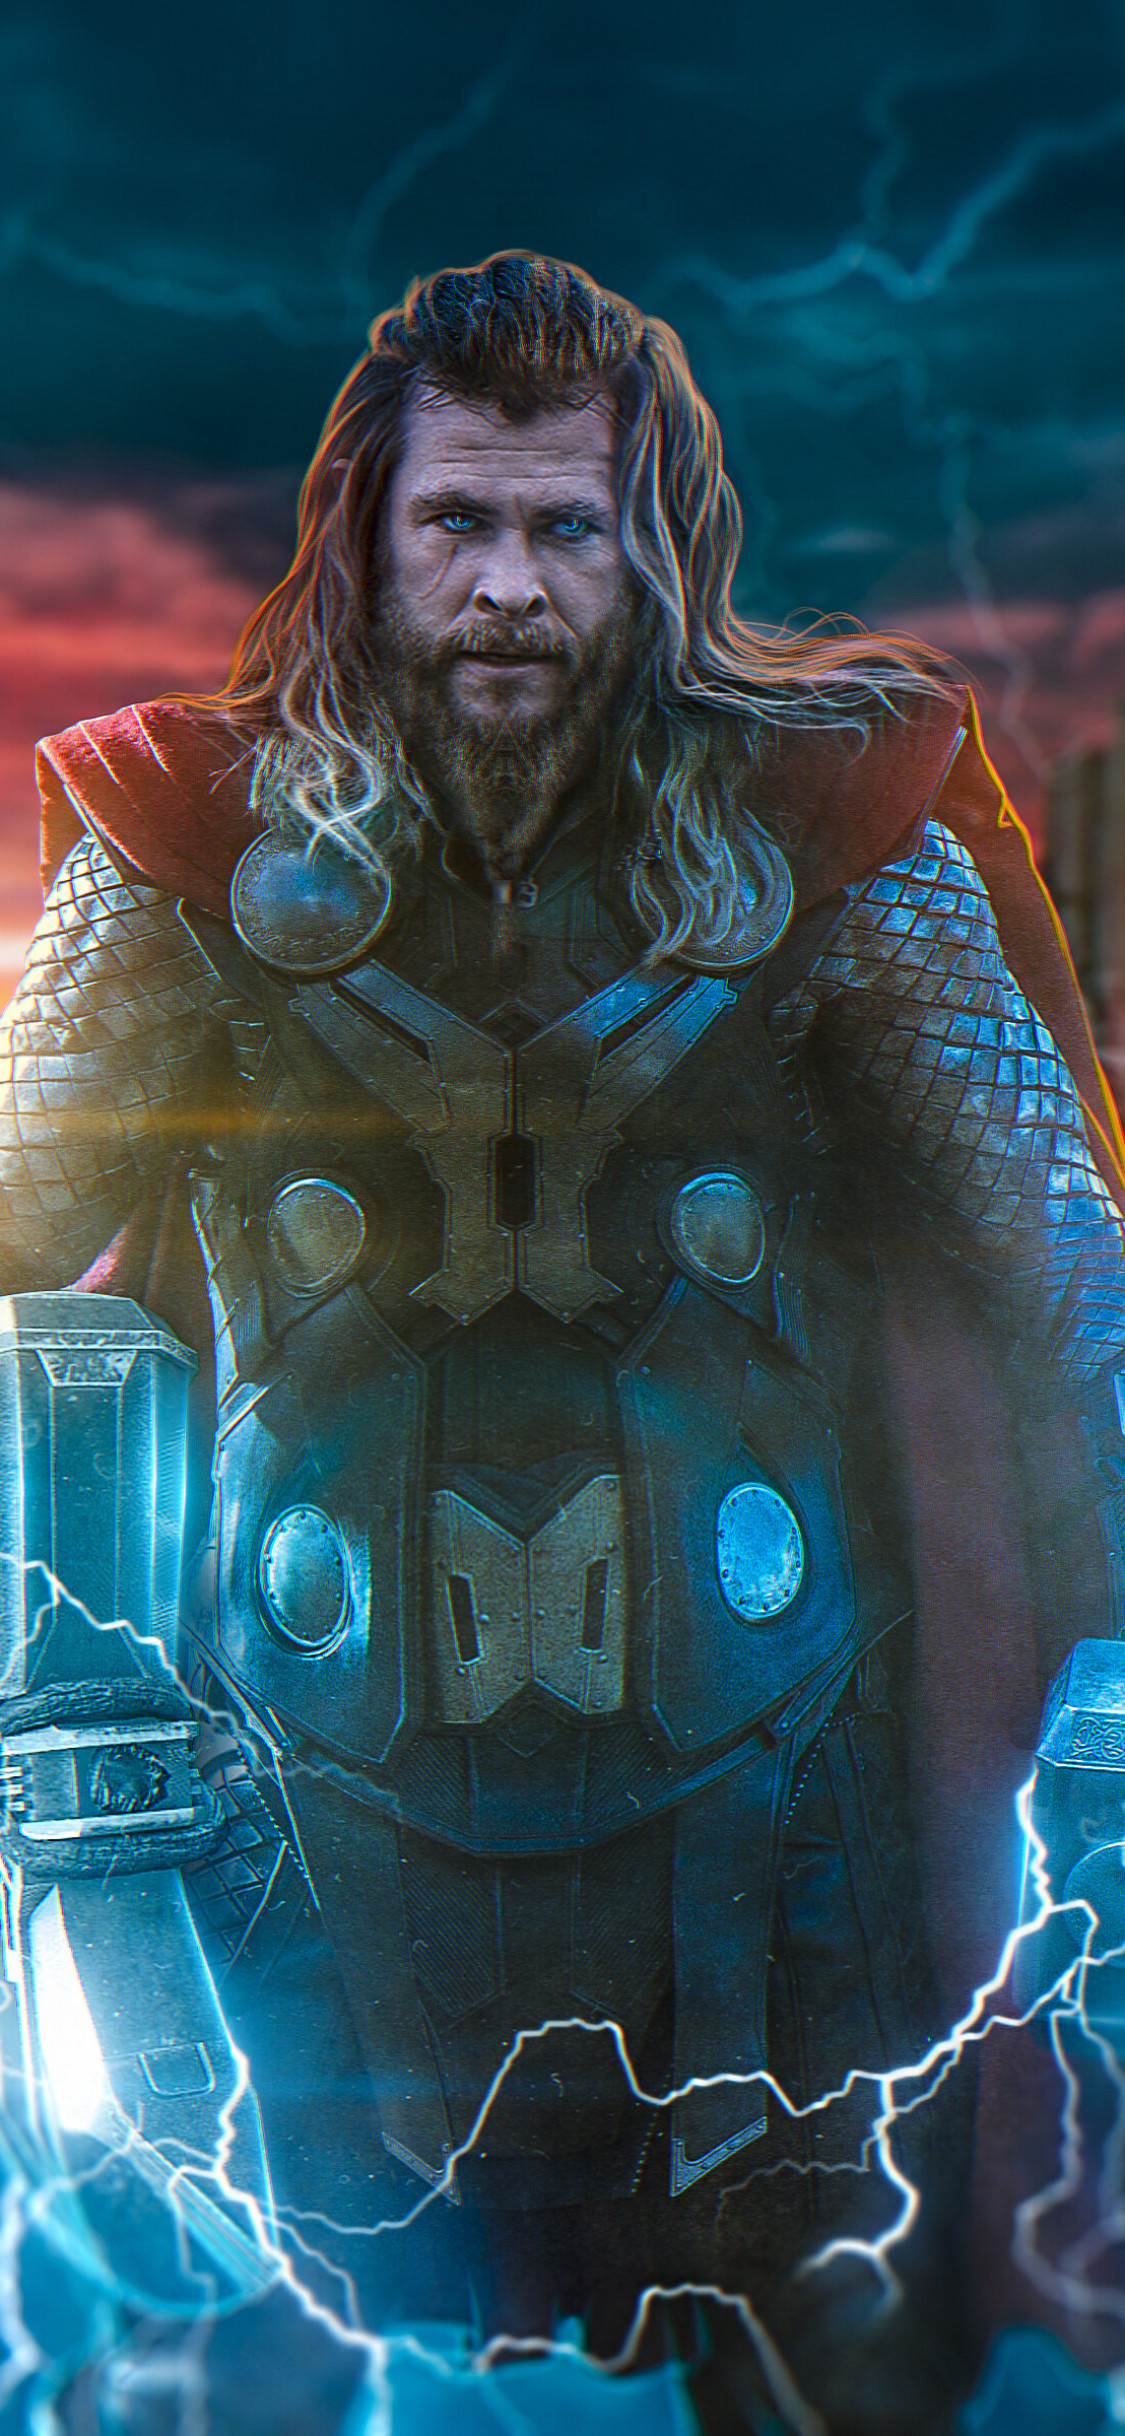 Thor In Avengers Endgame New iPhone XS, iPhone iPhone